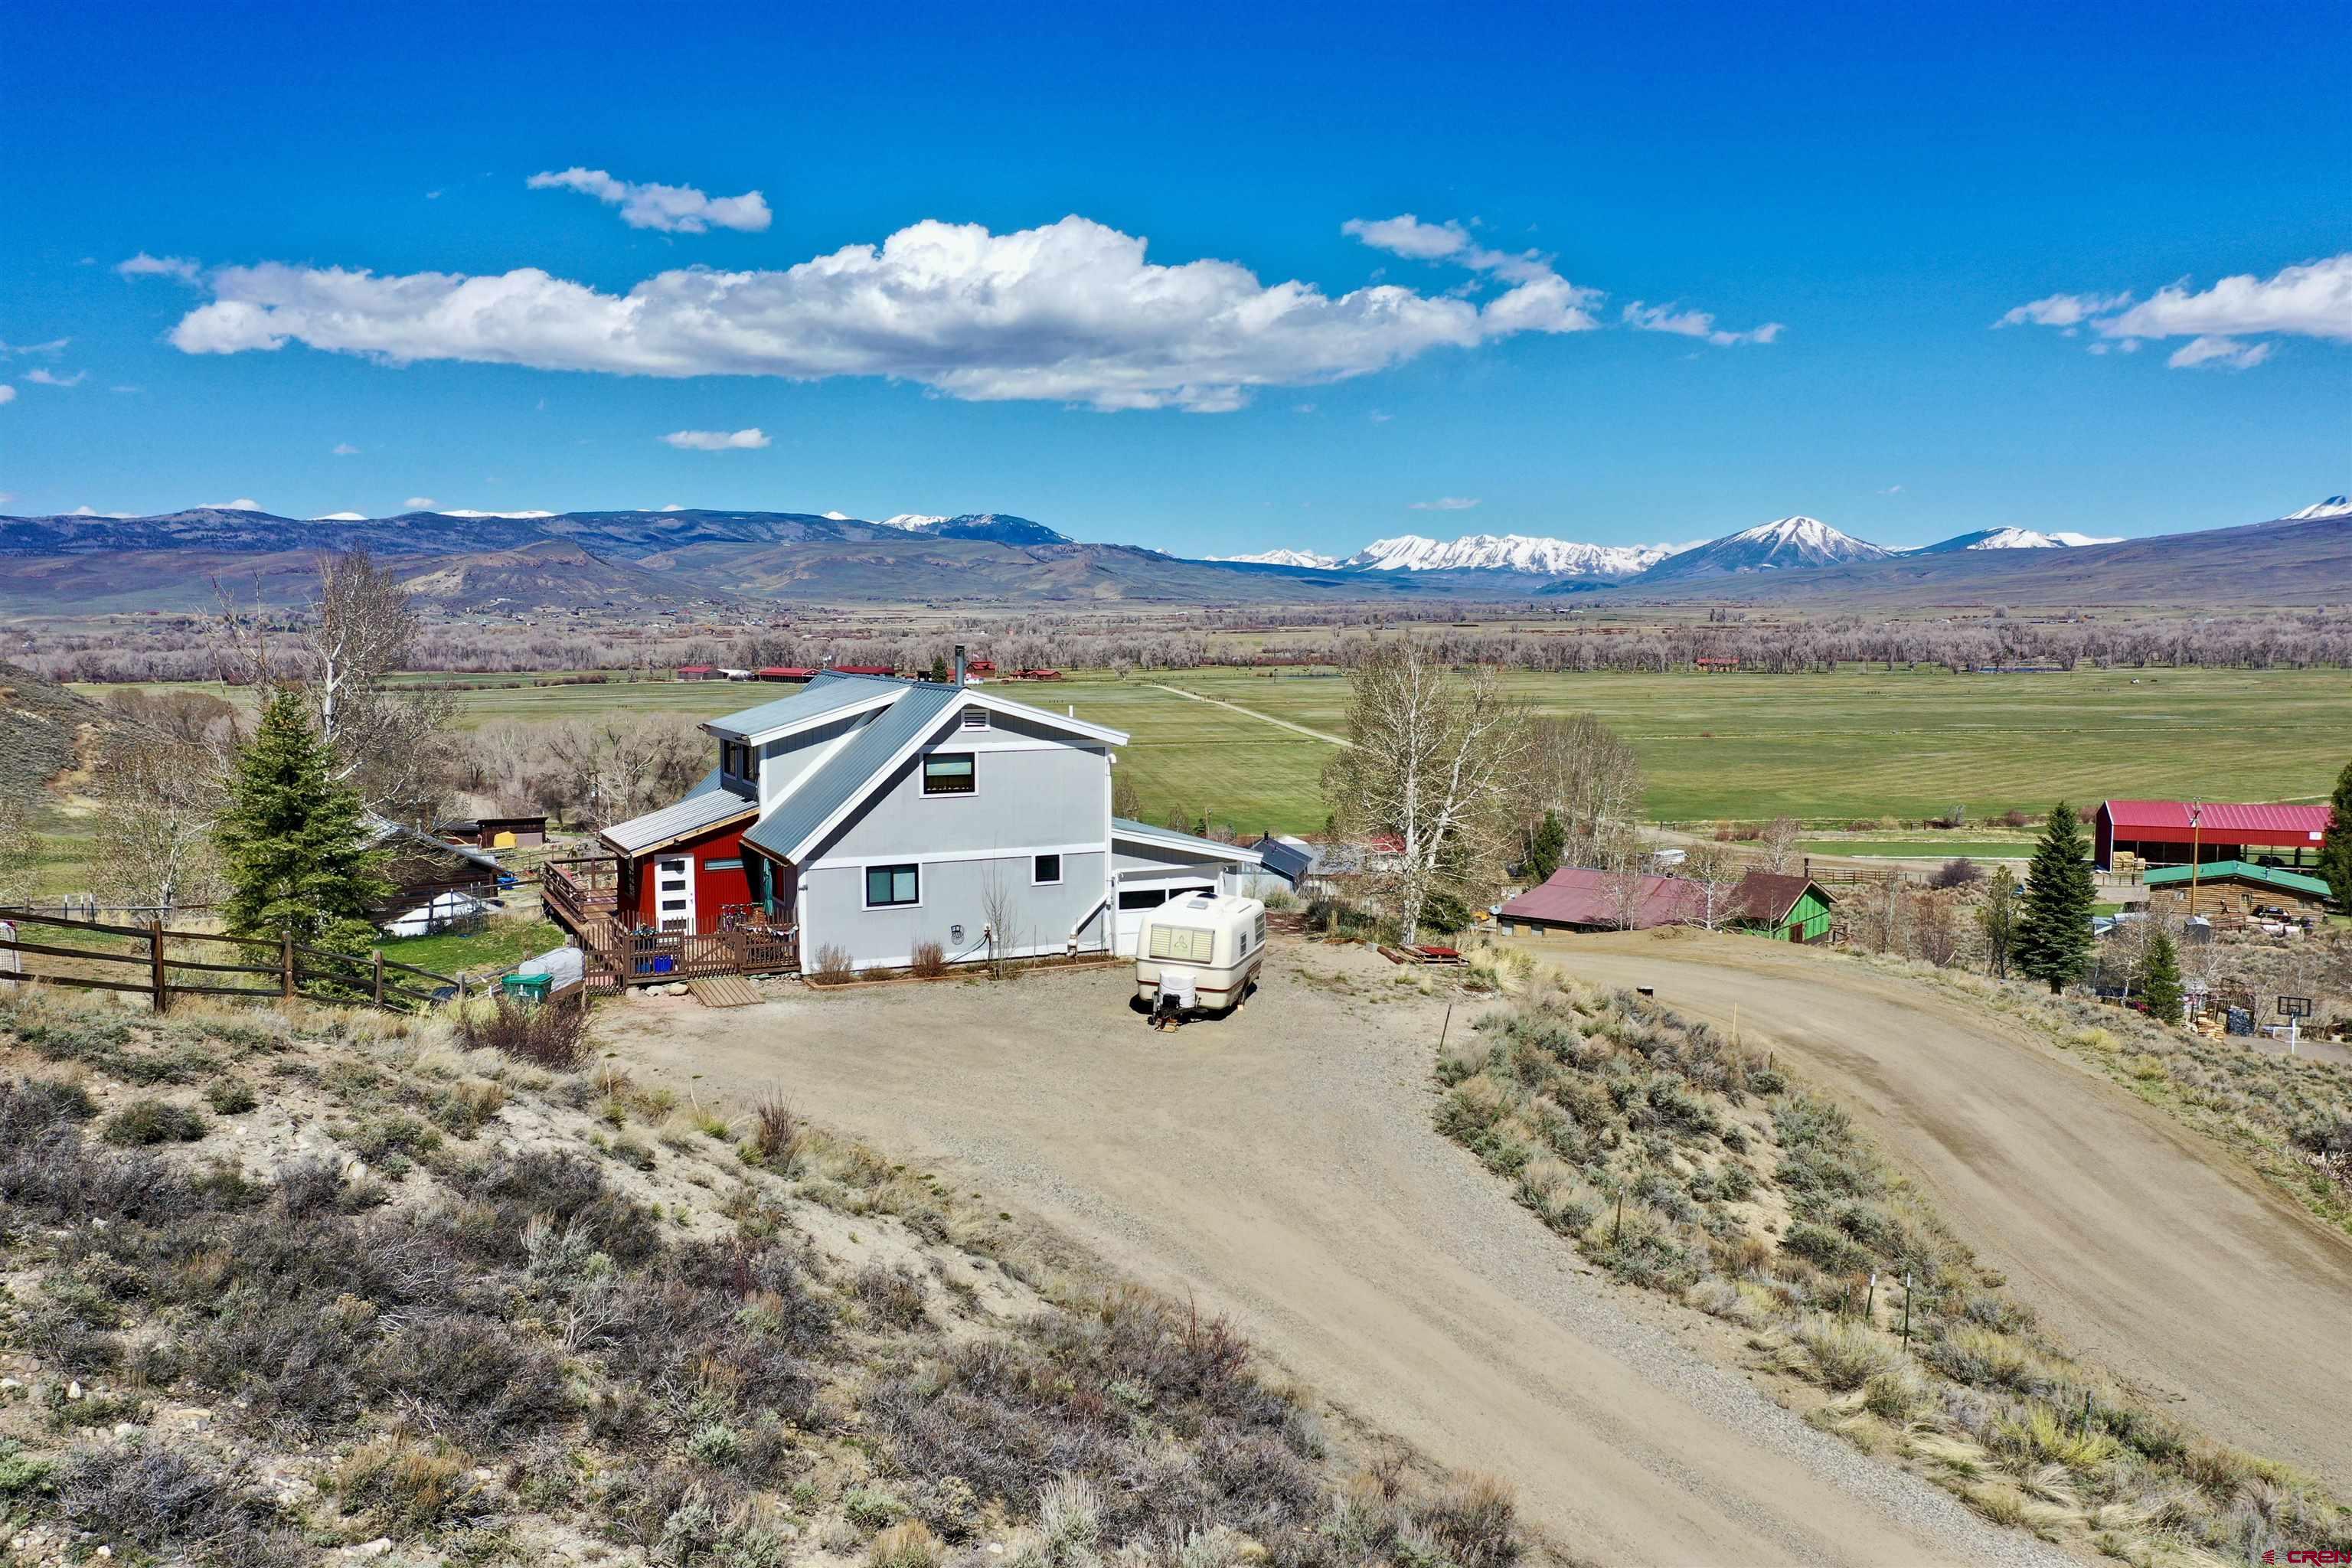 Welcome Home to 99 Candlelight Lane!  Phenomenal views of Red Mountain, Anthracite mountain range, & Ohio Creek valley ranchlands.  Charming and inviting 3 bdrm/2 bath, 1786 square foot home with new mudroom, open kitchen with granite counters, dining room, living room & pellet stove all located near Cranor Hill ski area.  Attached one car garage, fenced yard & trees.